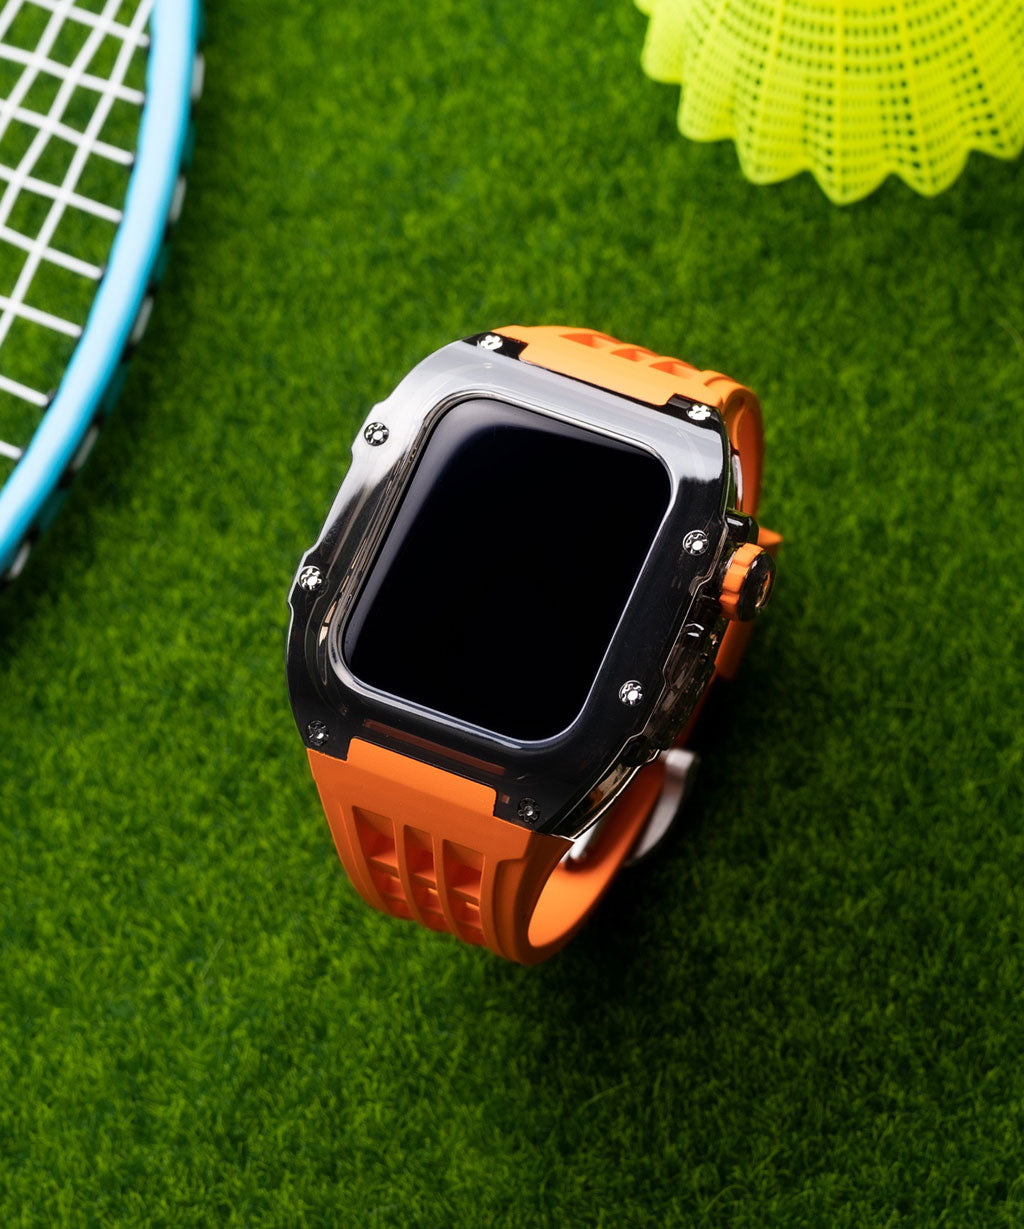 Apple-Watch-Glacier-X-Case-and-Band-colors-6